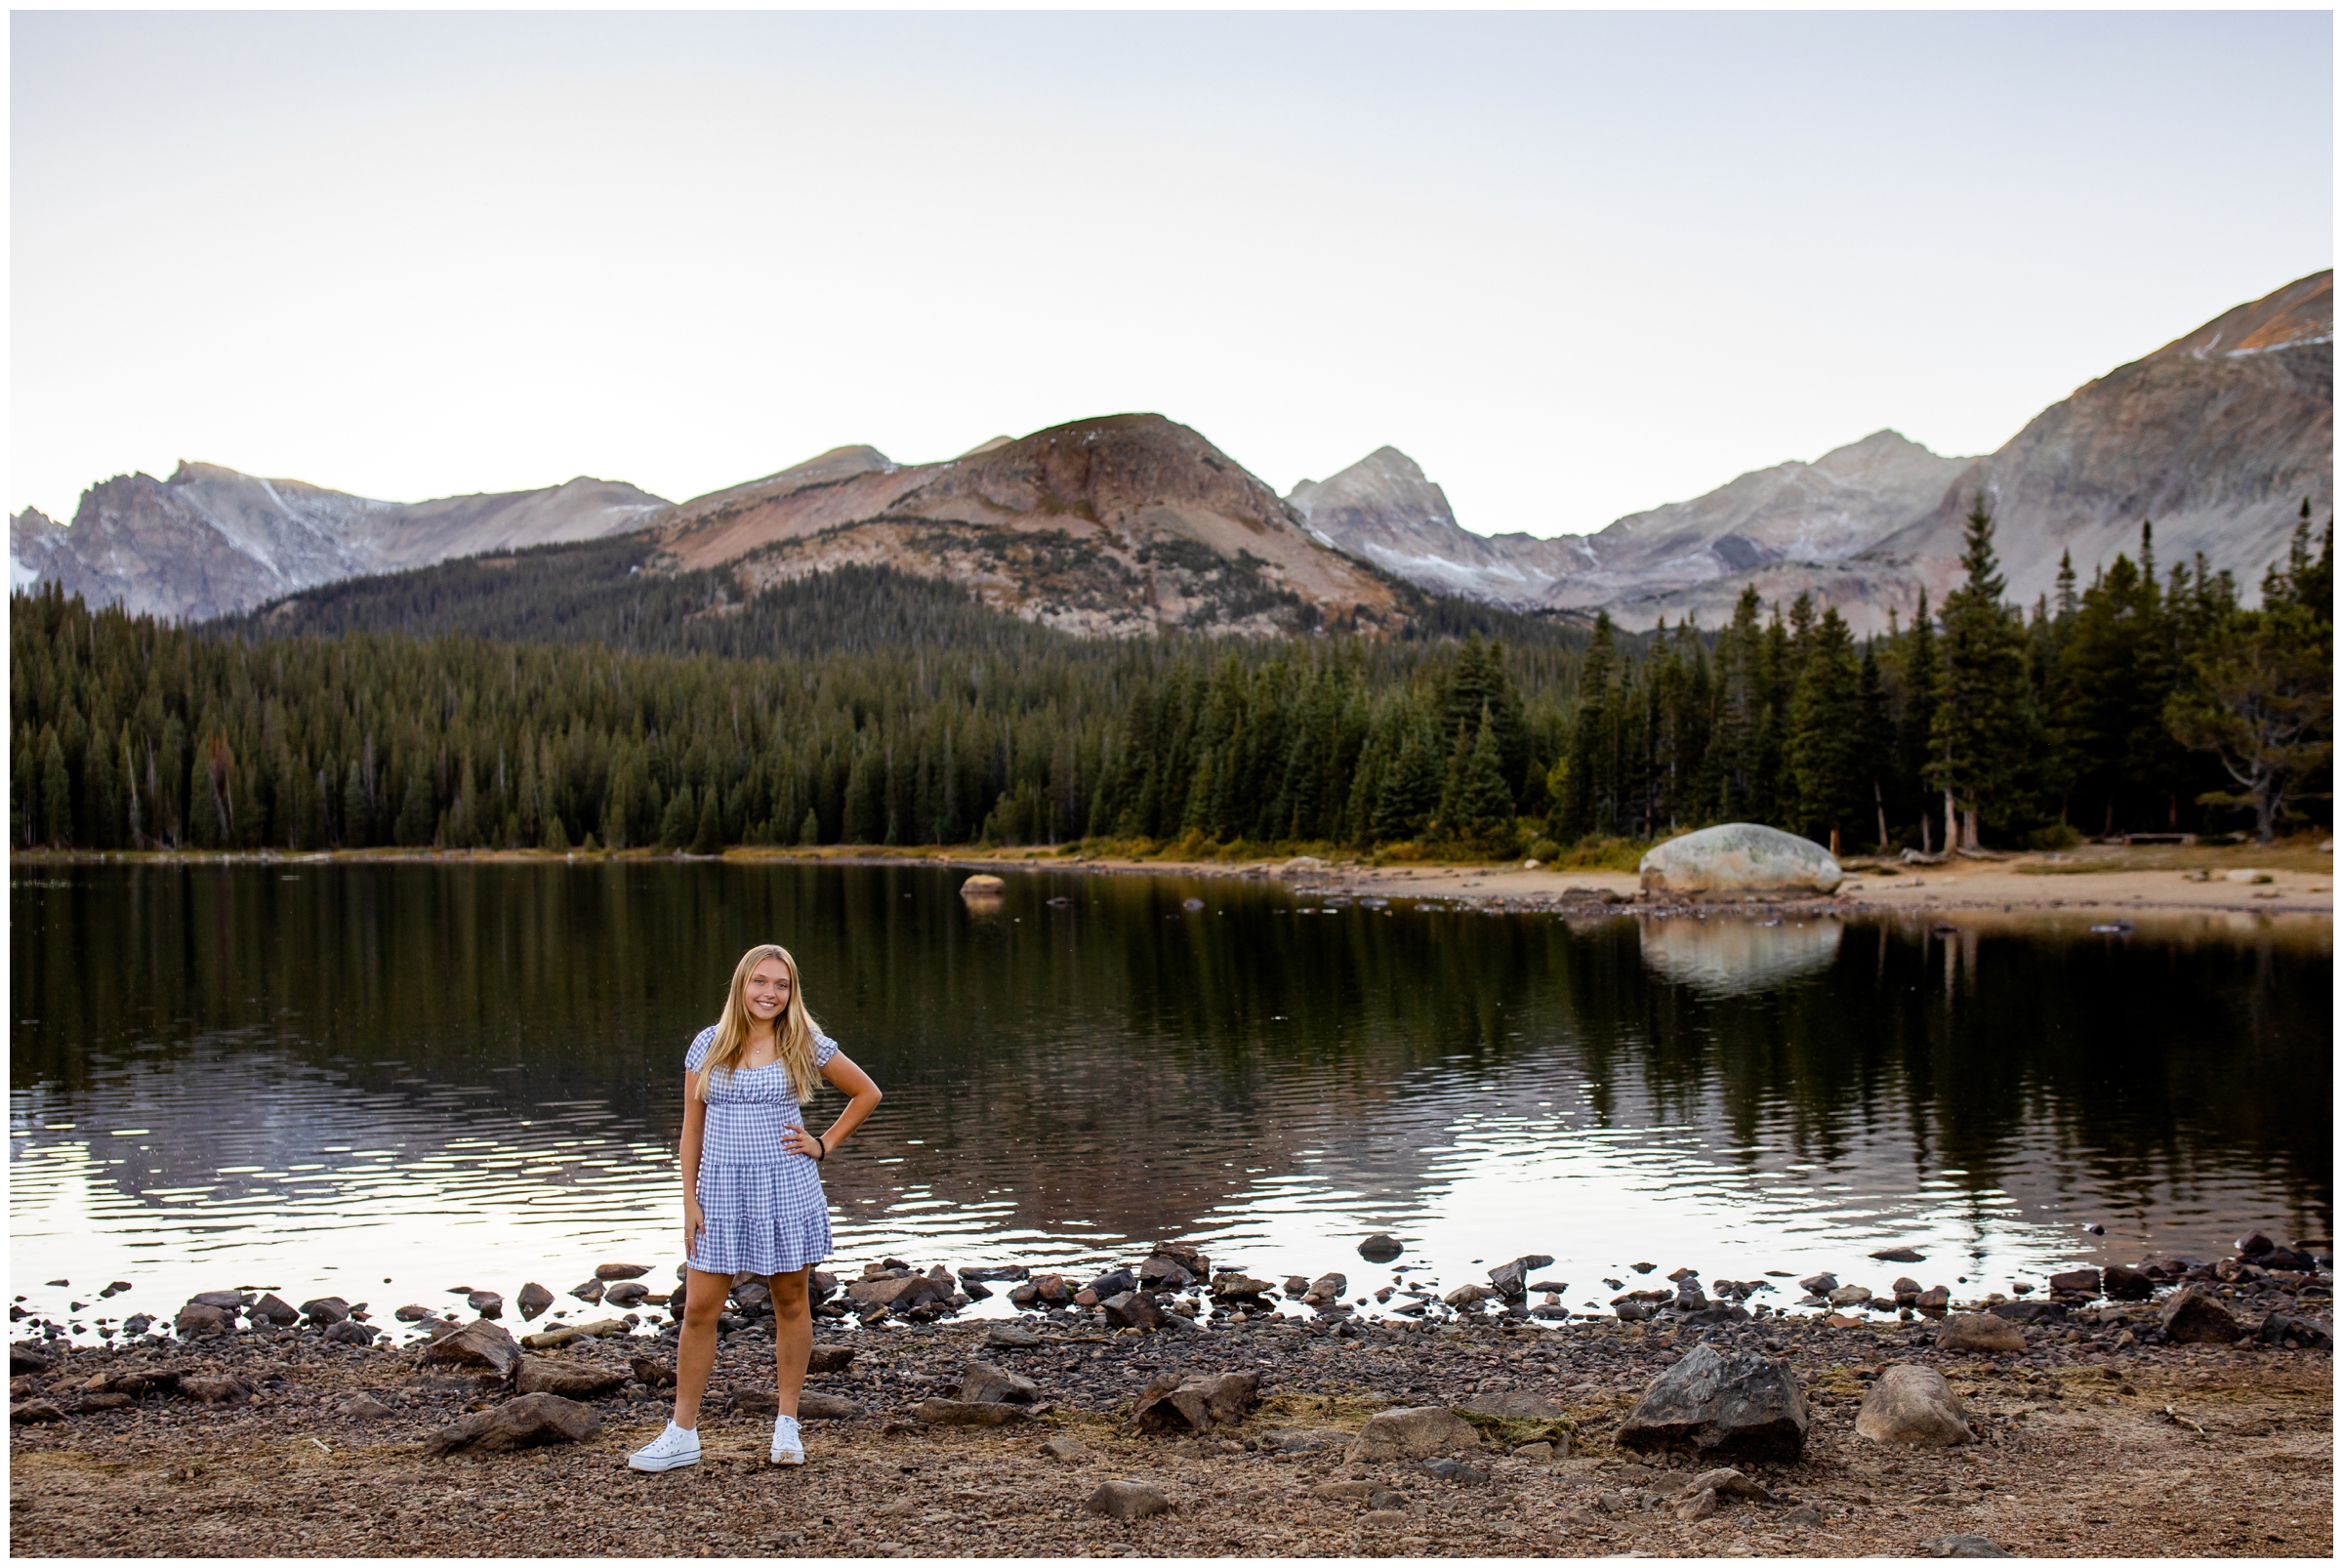 teen in gingham dress posing in front of mountain lake for senior pictures in Colorado mountains 